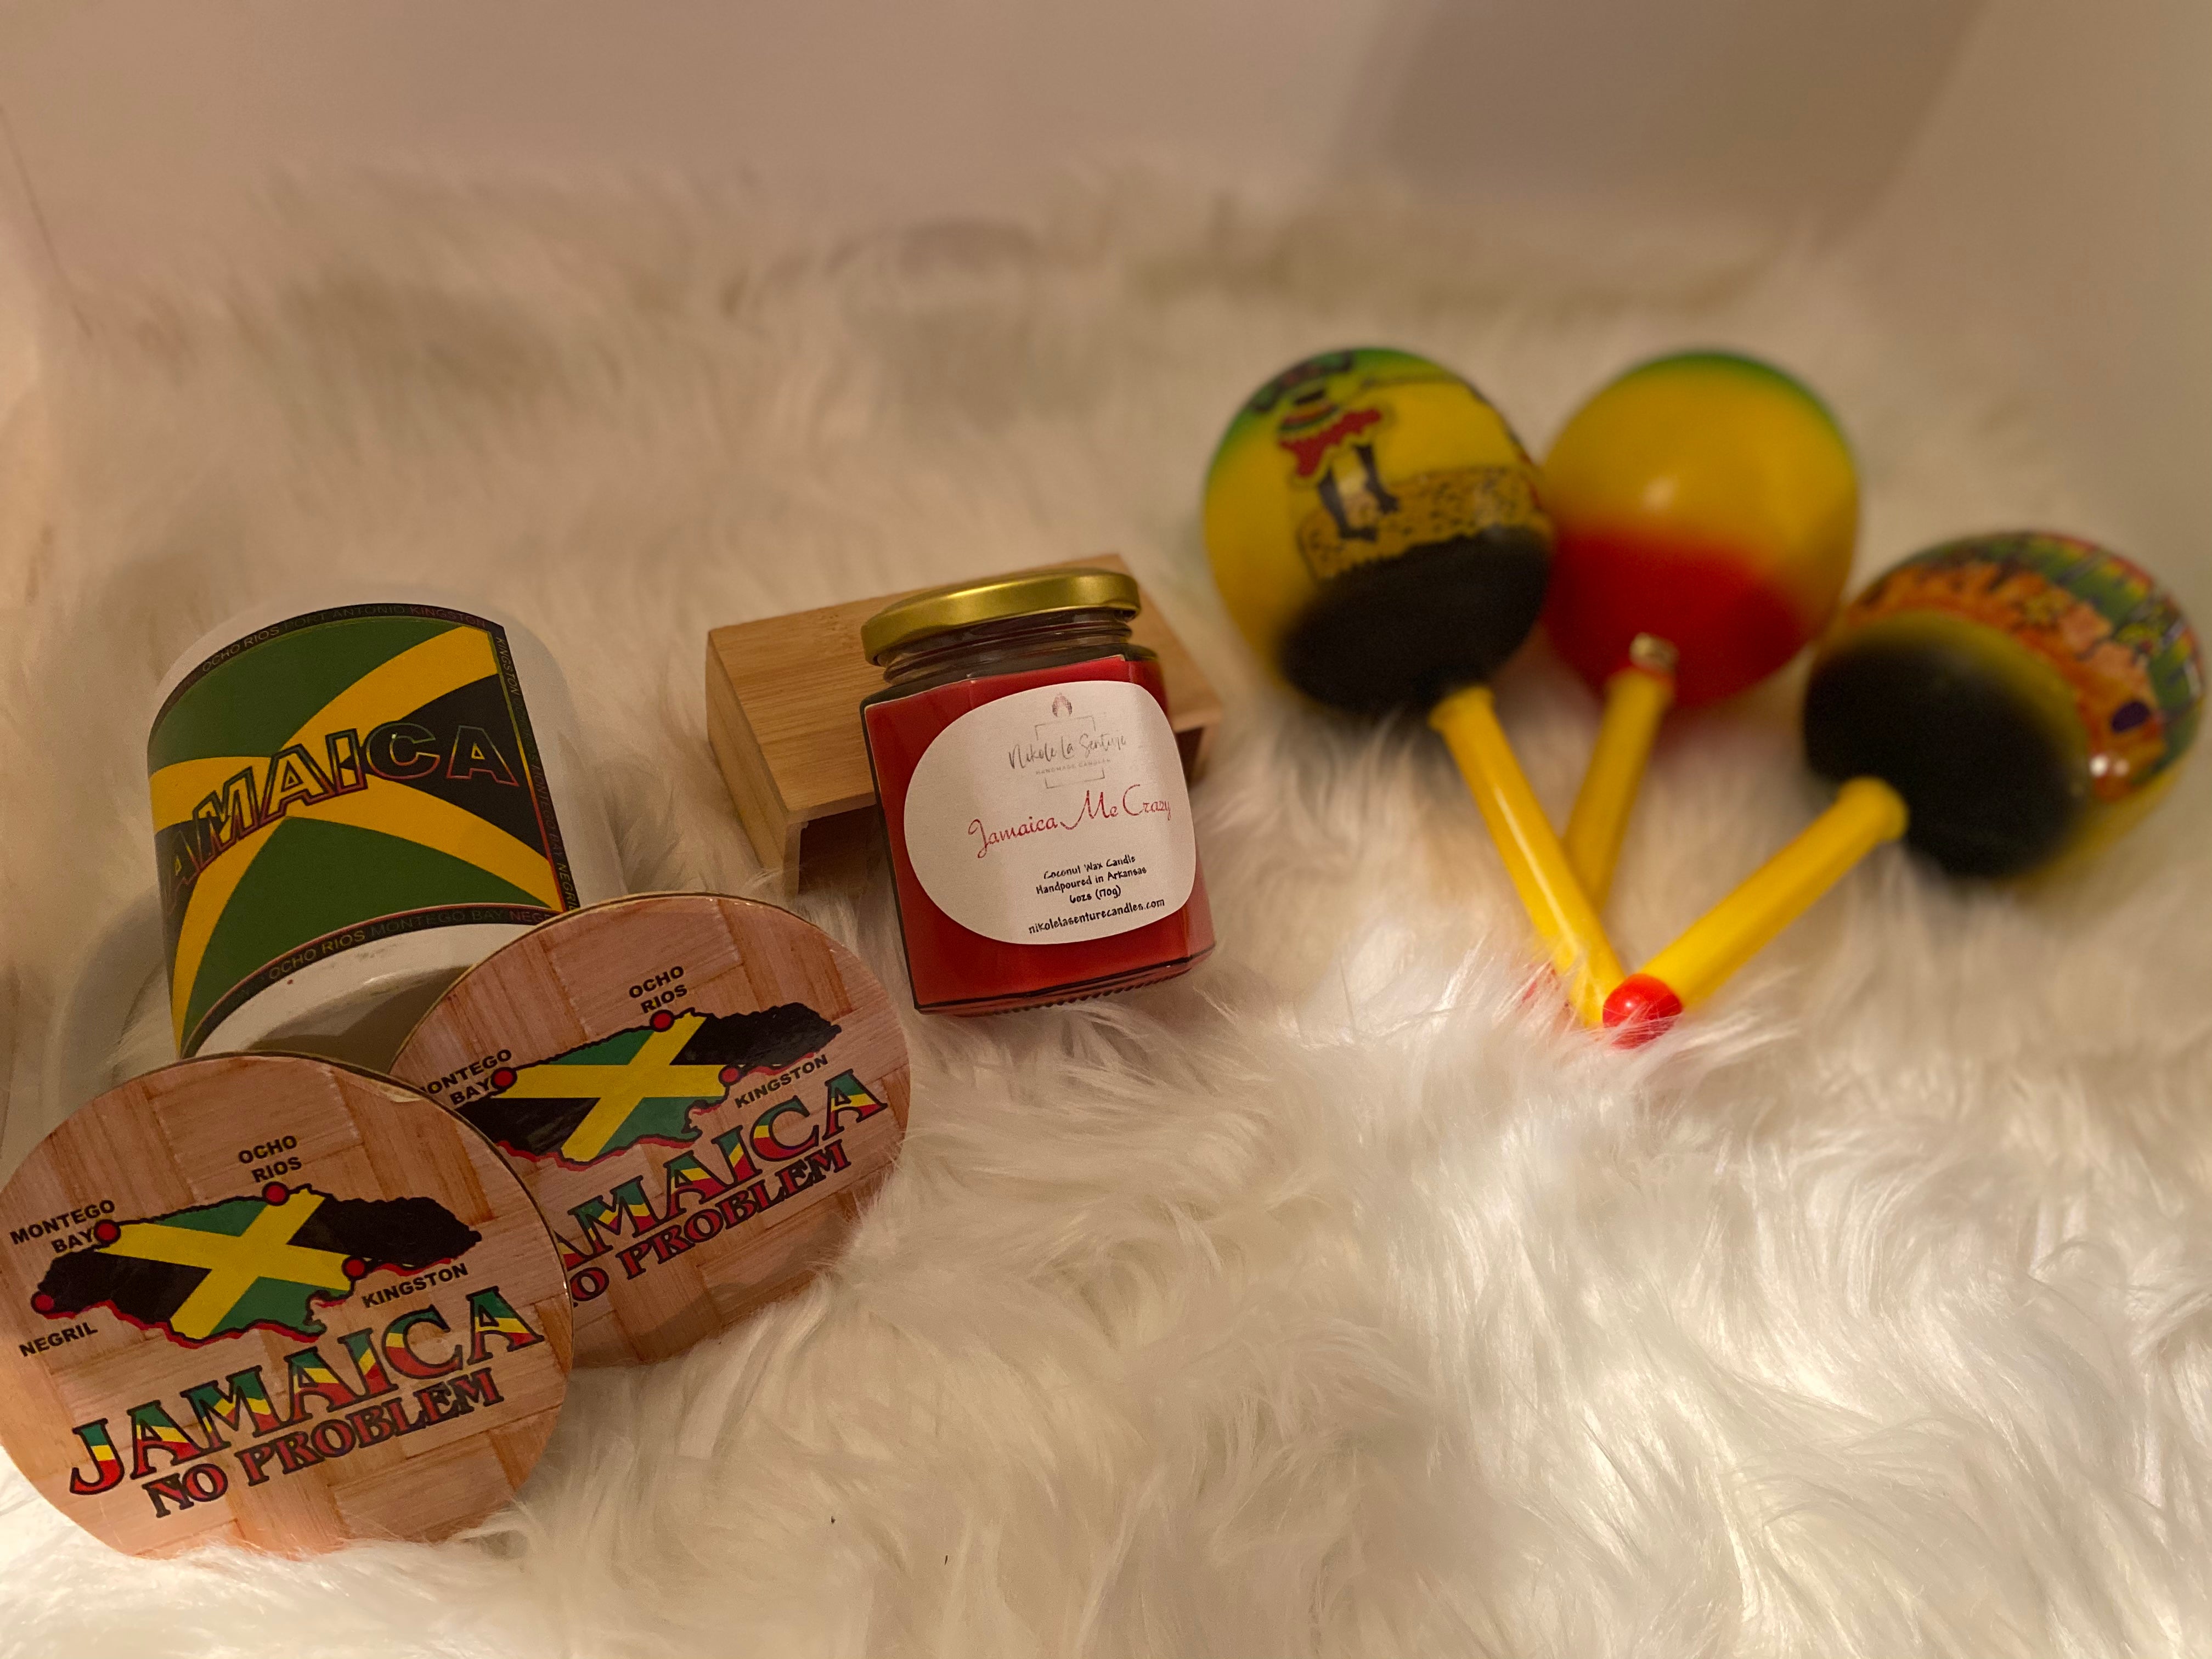 Jamaican Smile Candle Melts – Candles by Mazique